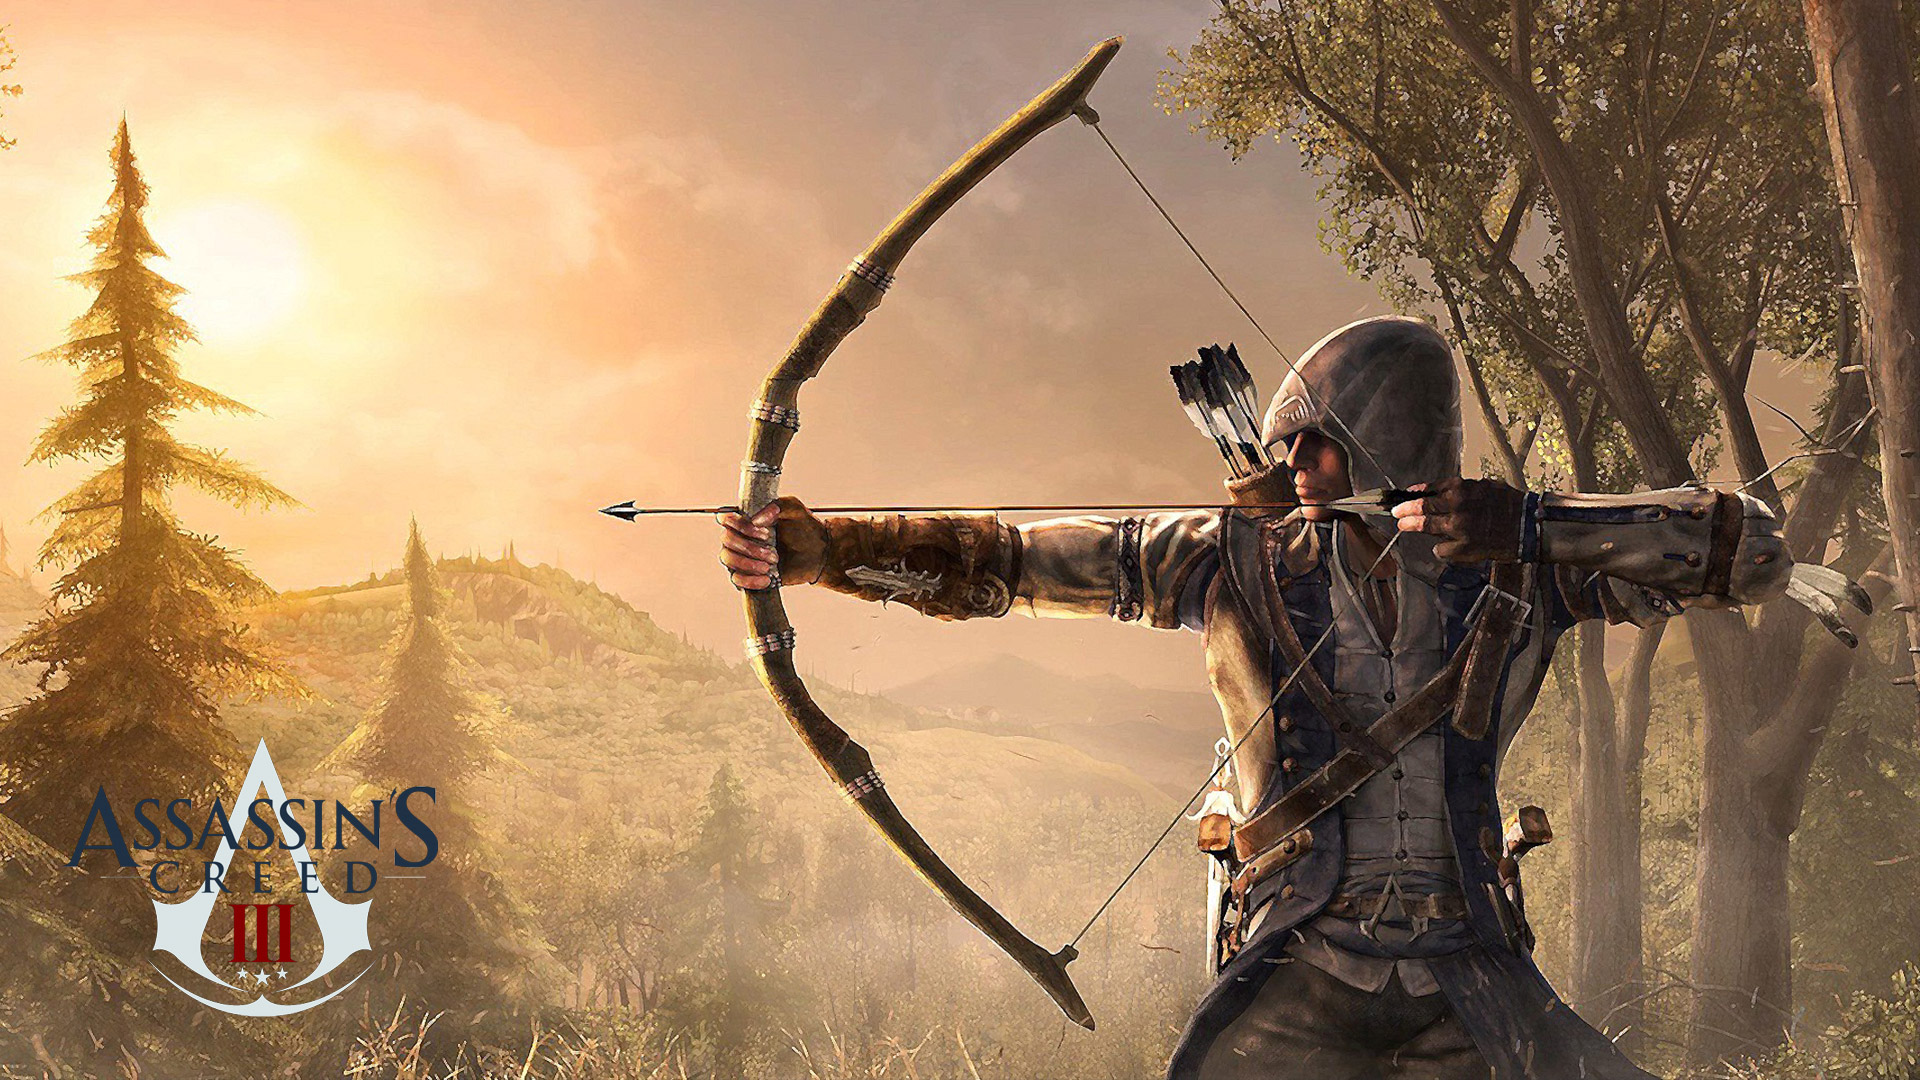 Wallpapers Assassins Creed III   Geekeries   Back to the GEEK 1920x1080